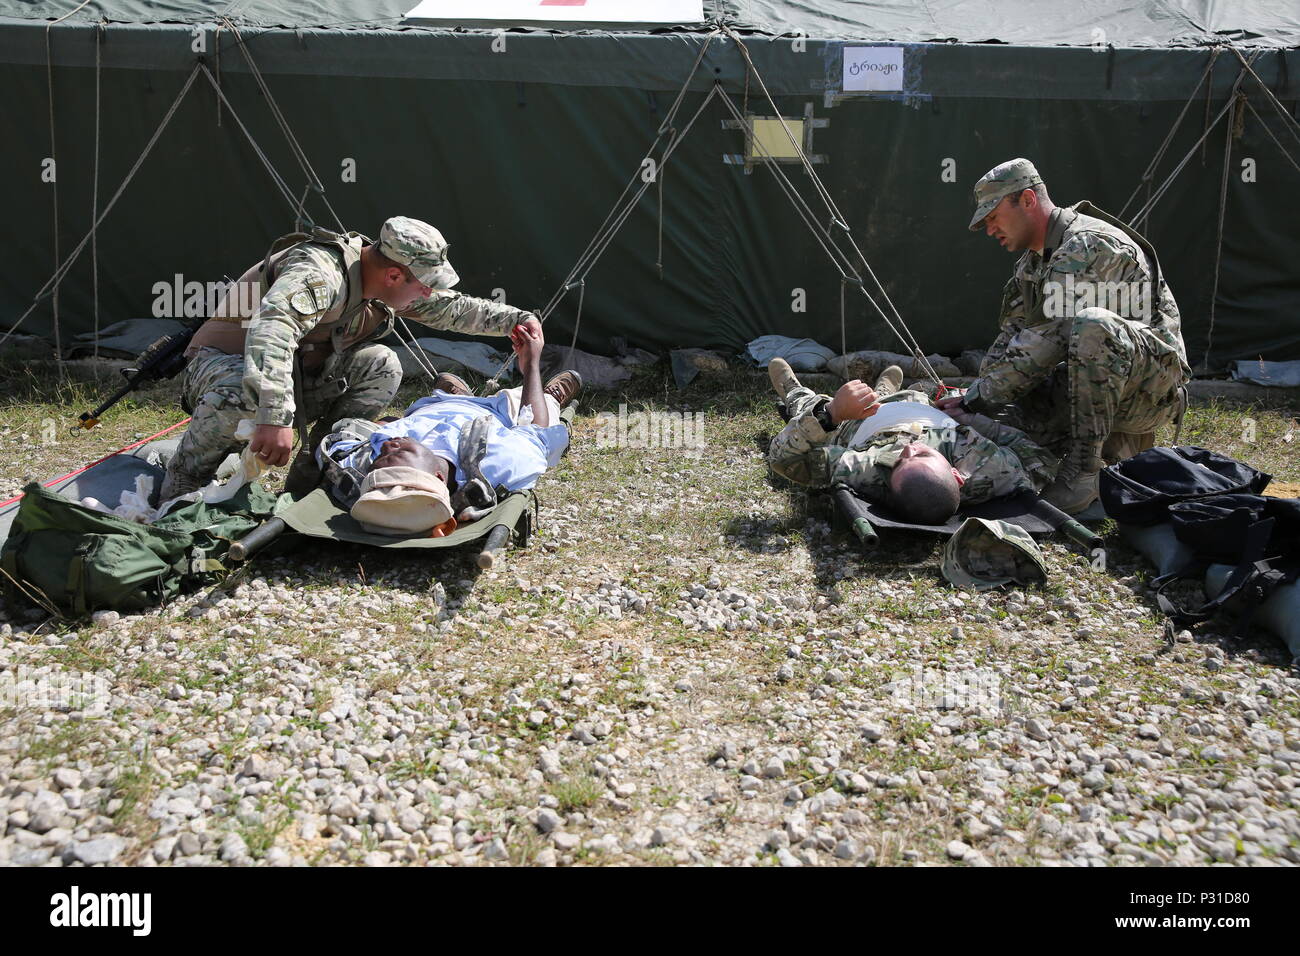 Georgian soldiers of the 32nd Infantry Battalion perform first aid on simulated casualties while conducting a mass casualty scenario during a mission rehearsal exercise (MRE) at the Joint Multinational Readiness Center in Hohenfels, Germany, Aug. 20, 2016. The MRE is a U.S.M.C. lead exercise involving over 1,100 Soldiers from Georgia, Hungary and the U.S. The MRE is based on the current operational environment and incorporates lessons learned in order to prepare the Georgian’s 32nd Infantry Battalion for offensive, defensive, and deployment in support of Operation Freedom Sentinel. (U.S. Army  Stock Photo